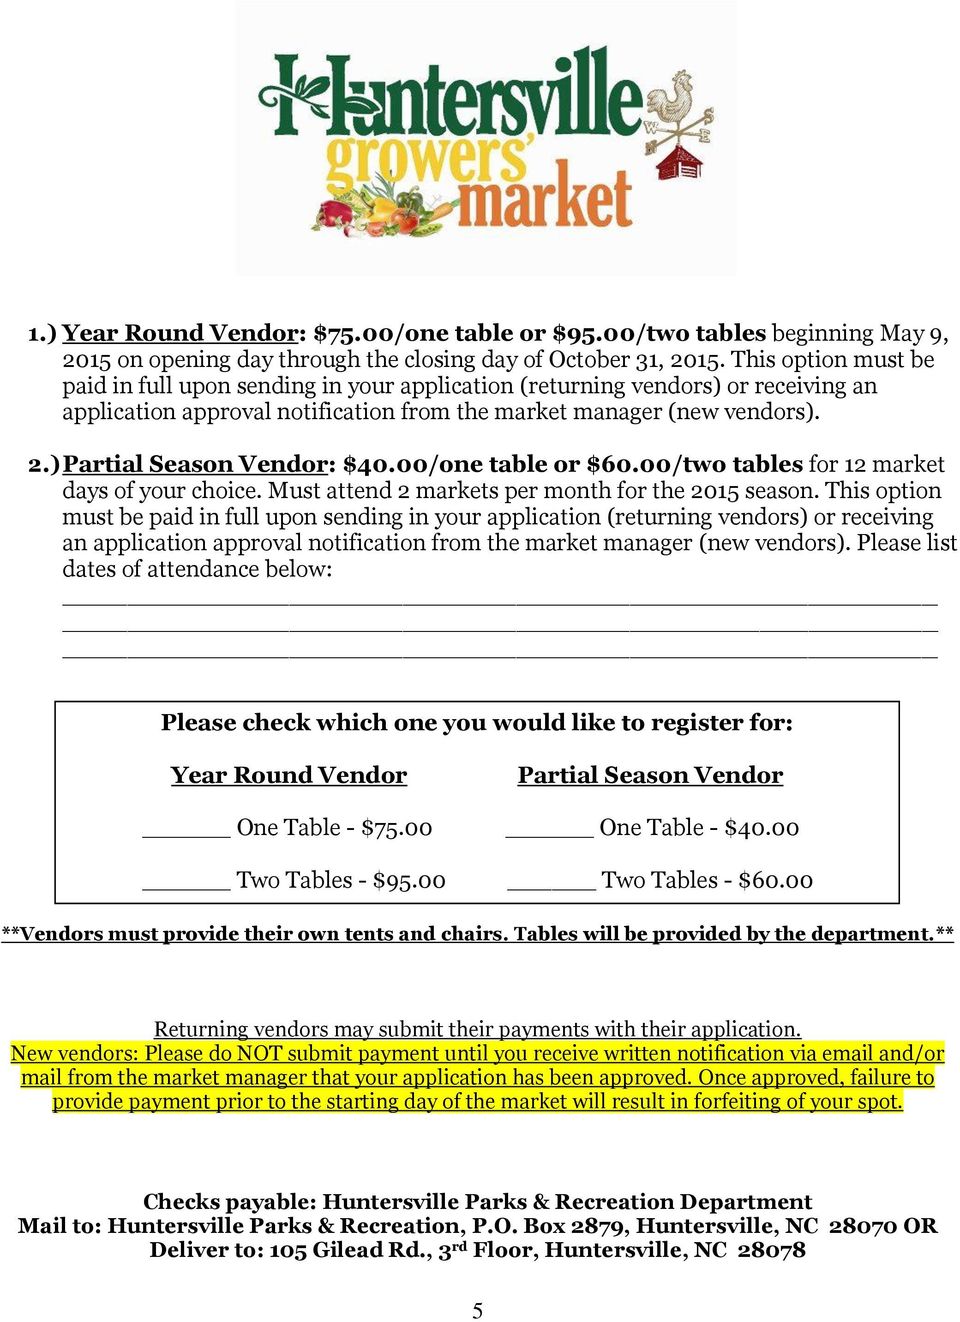 ) Partial Season Vendor: $40.00/one table or $60.00/two tables for 12 market days of your choice. Must attend 2 markets per month for the 2015 season.